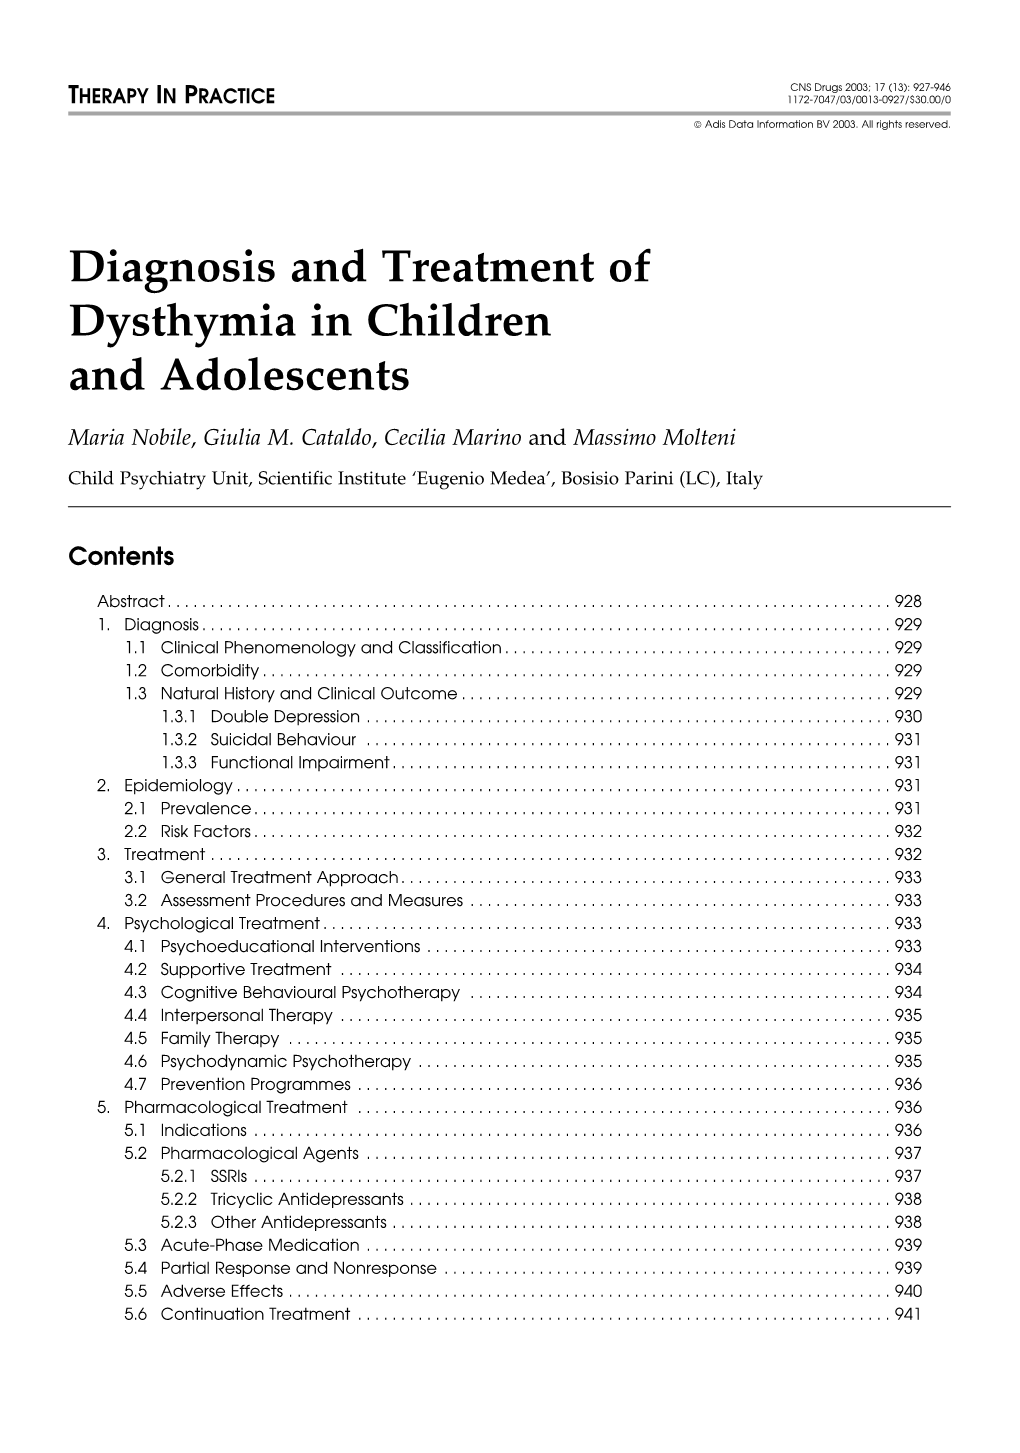 Diagnosis and Treatment of Dysthymia in Children and Adolescents